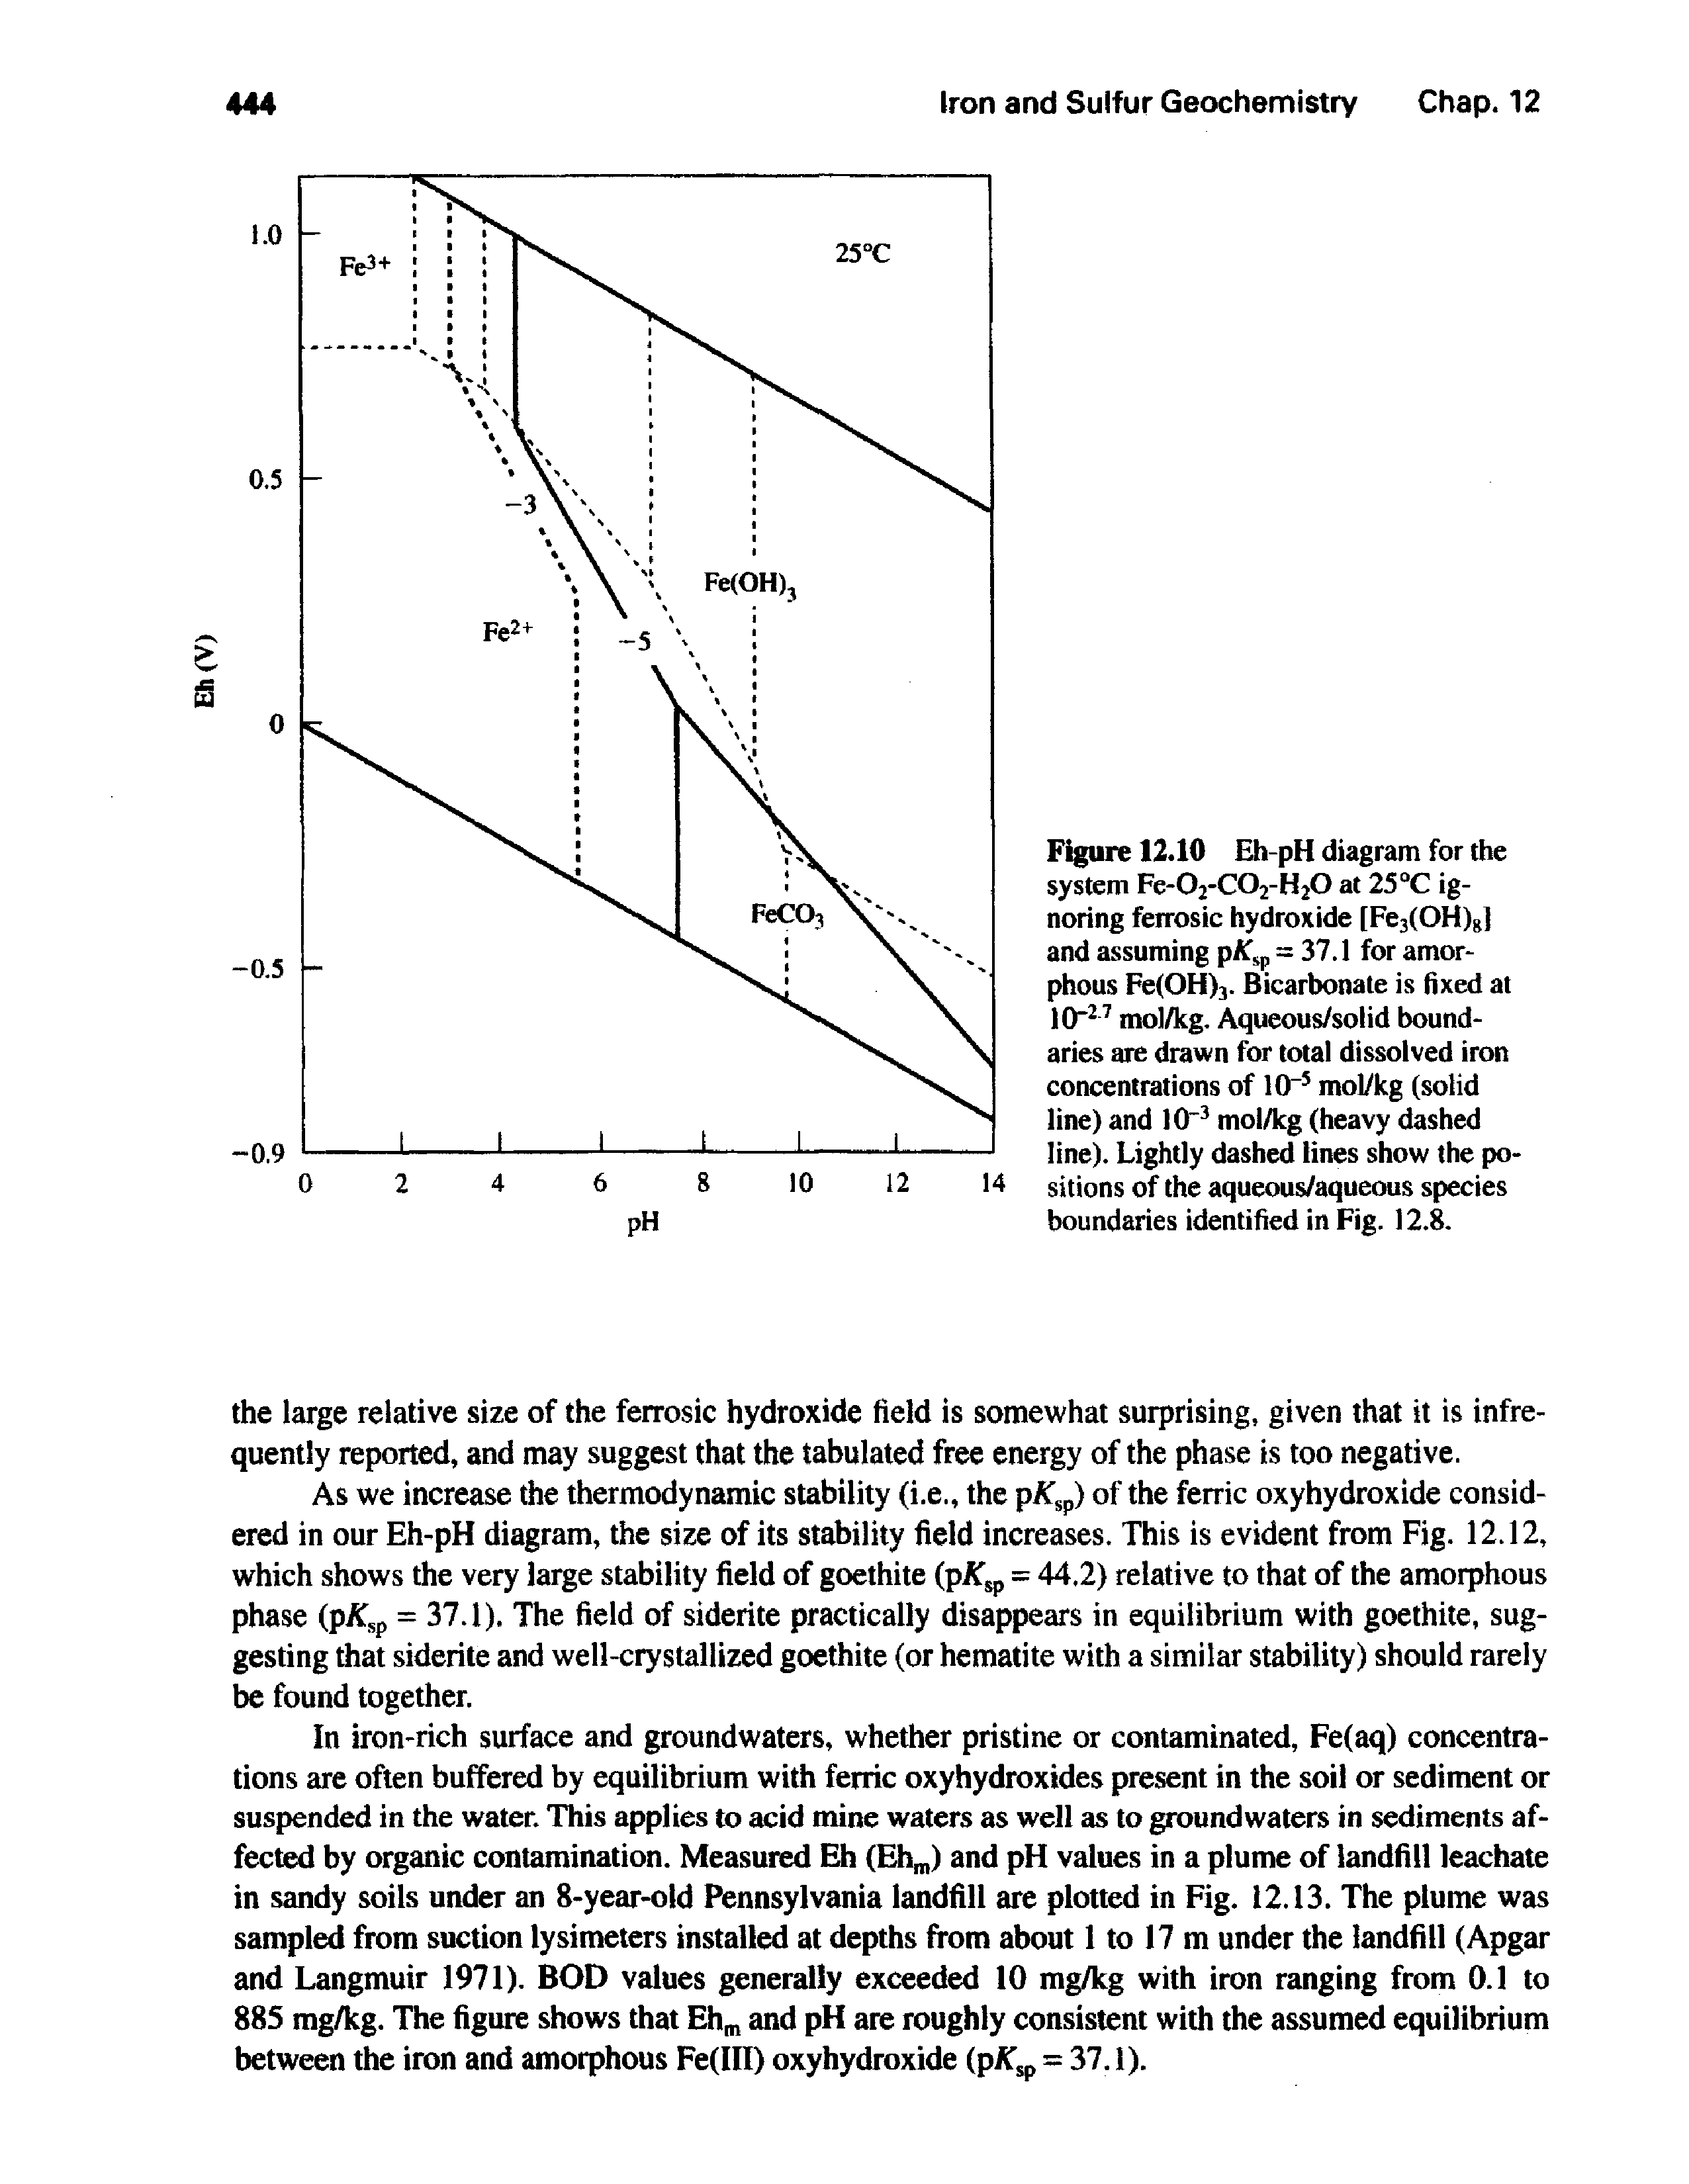 Figure 12.10 Eh-pH diagram for the system Fe-02-C02-H20 at 25 C ignoring ferrosic hydroxide [Fc3(OH)g] and assuming = 37.1 for amorphous Fe(OH>3. Bicarbonate is fixed at 10 mol/kg. Aqueous/solid boundaries are drawn for total dissolved iron concentrations of 10 mol/kg (solid line) and ICF mol/kg (heavy dashed line). Lightly dashed lines show the positions of the aqueous/aqueous species boundaries identified in Fig. 12.8.